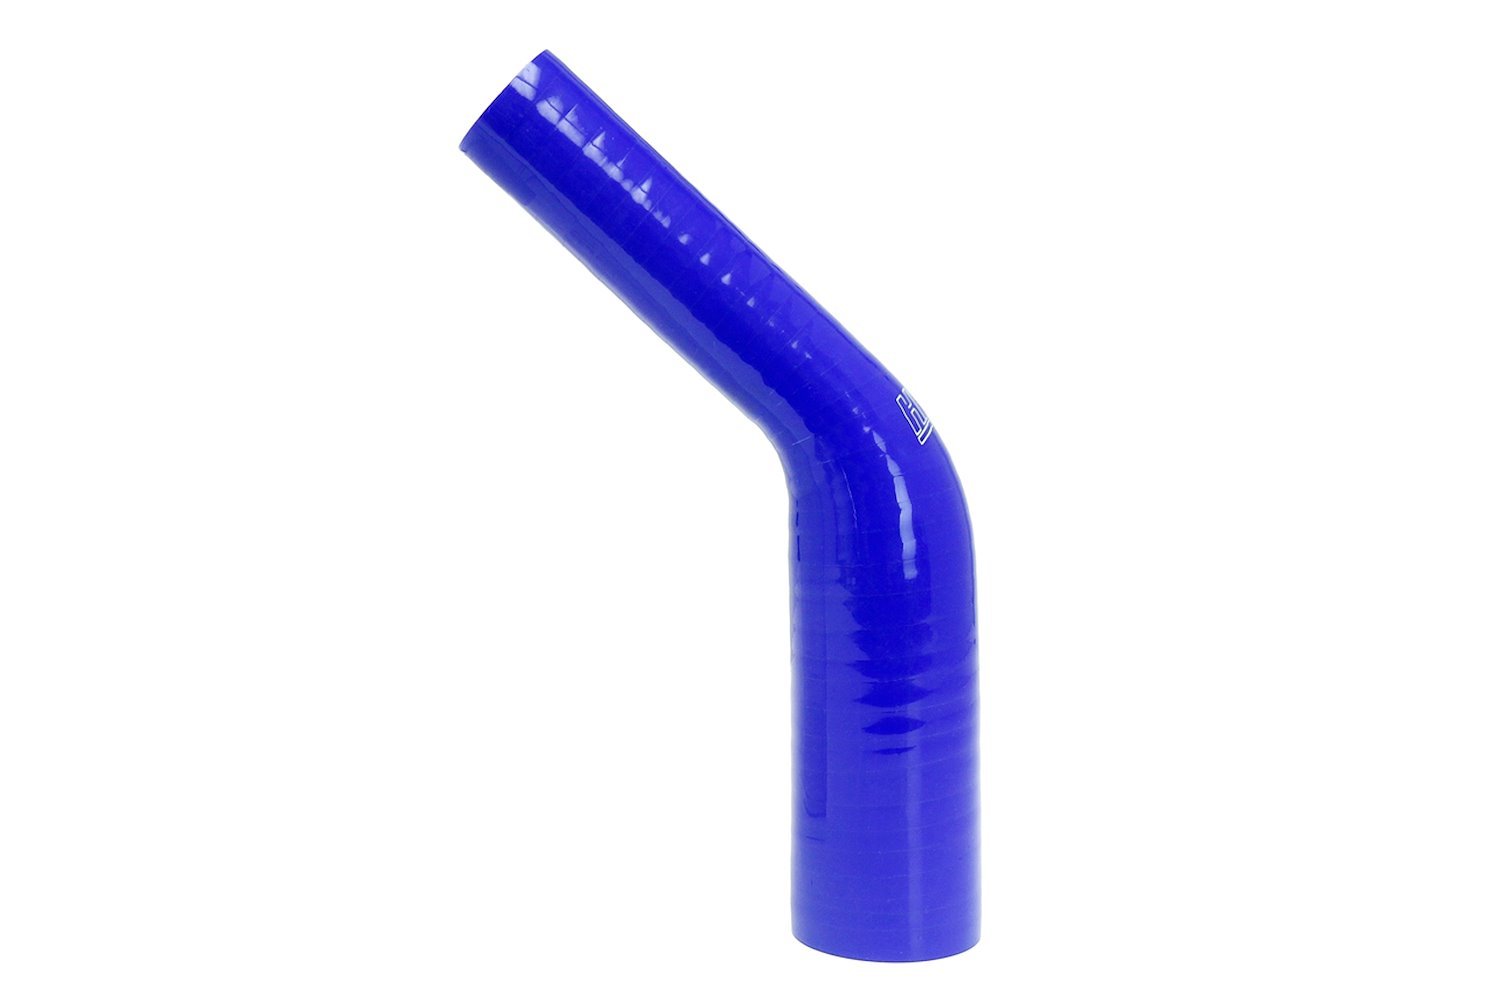 HTSER45-062-150-BLUE Silicone 45-Degree Elbow Hose, High-Temp 4-Ply Reinforced, 5/8 in. - 1-1/2 in. ID, Blue